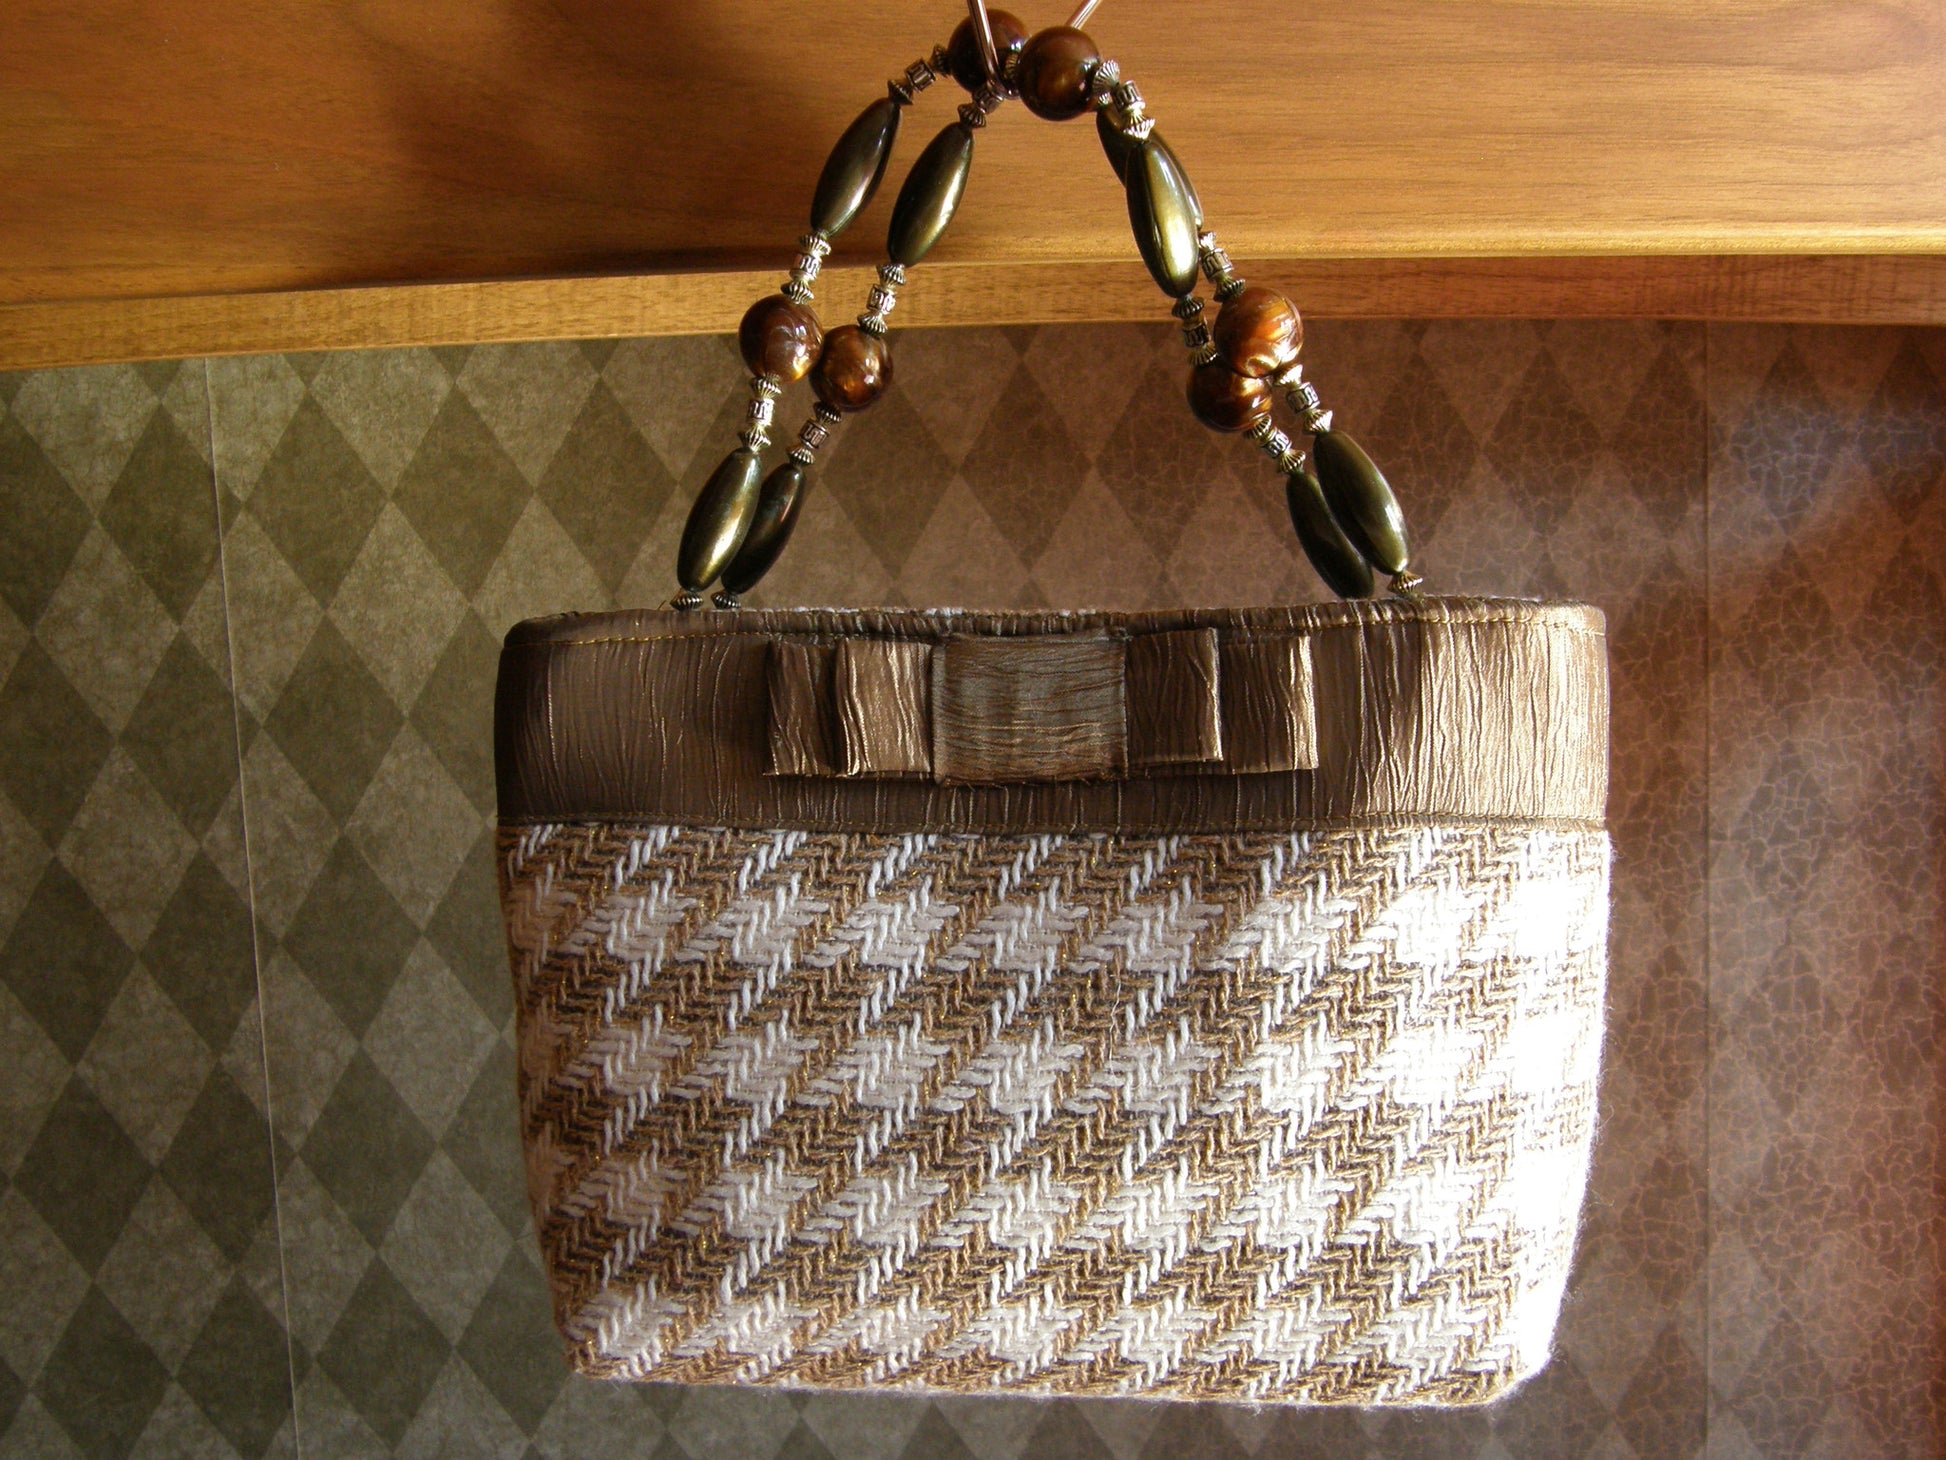 Beige and Gold Houndstooth Purse from Jenny Jagwear Design. Small ladies purse in 8" x 7" with gold and white houndstooth cloth fabric, gold tafetta trim and bow, with olive, gold and brown beaded handles.  Purse small enough to hold in your hand or use the handles. The Isabella Collection from Jenny Jag-Wear Design